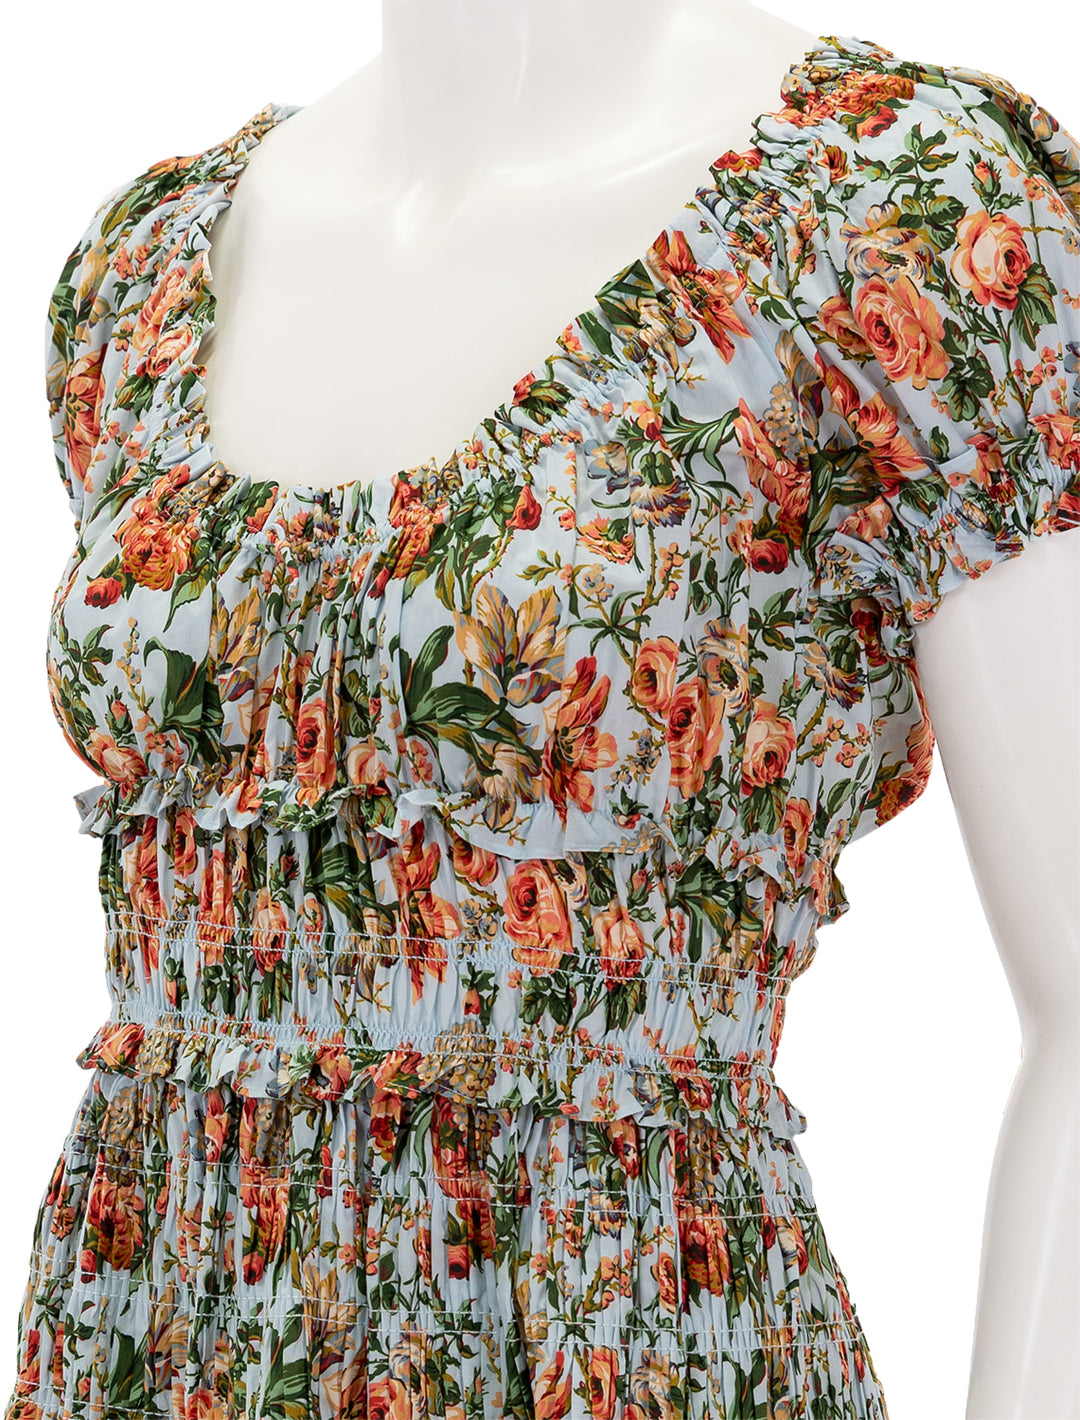 Close-up view of Doen's leanne dress in calico garden.